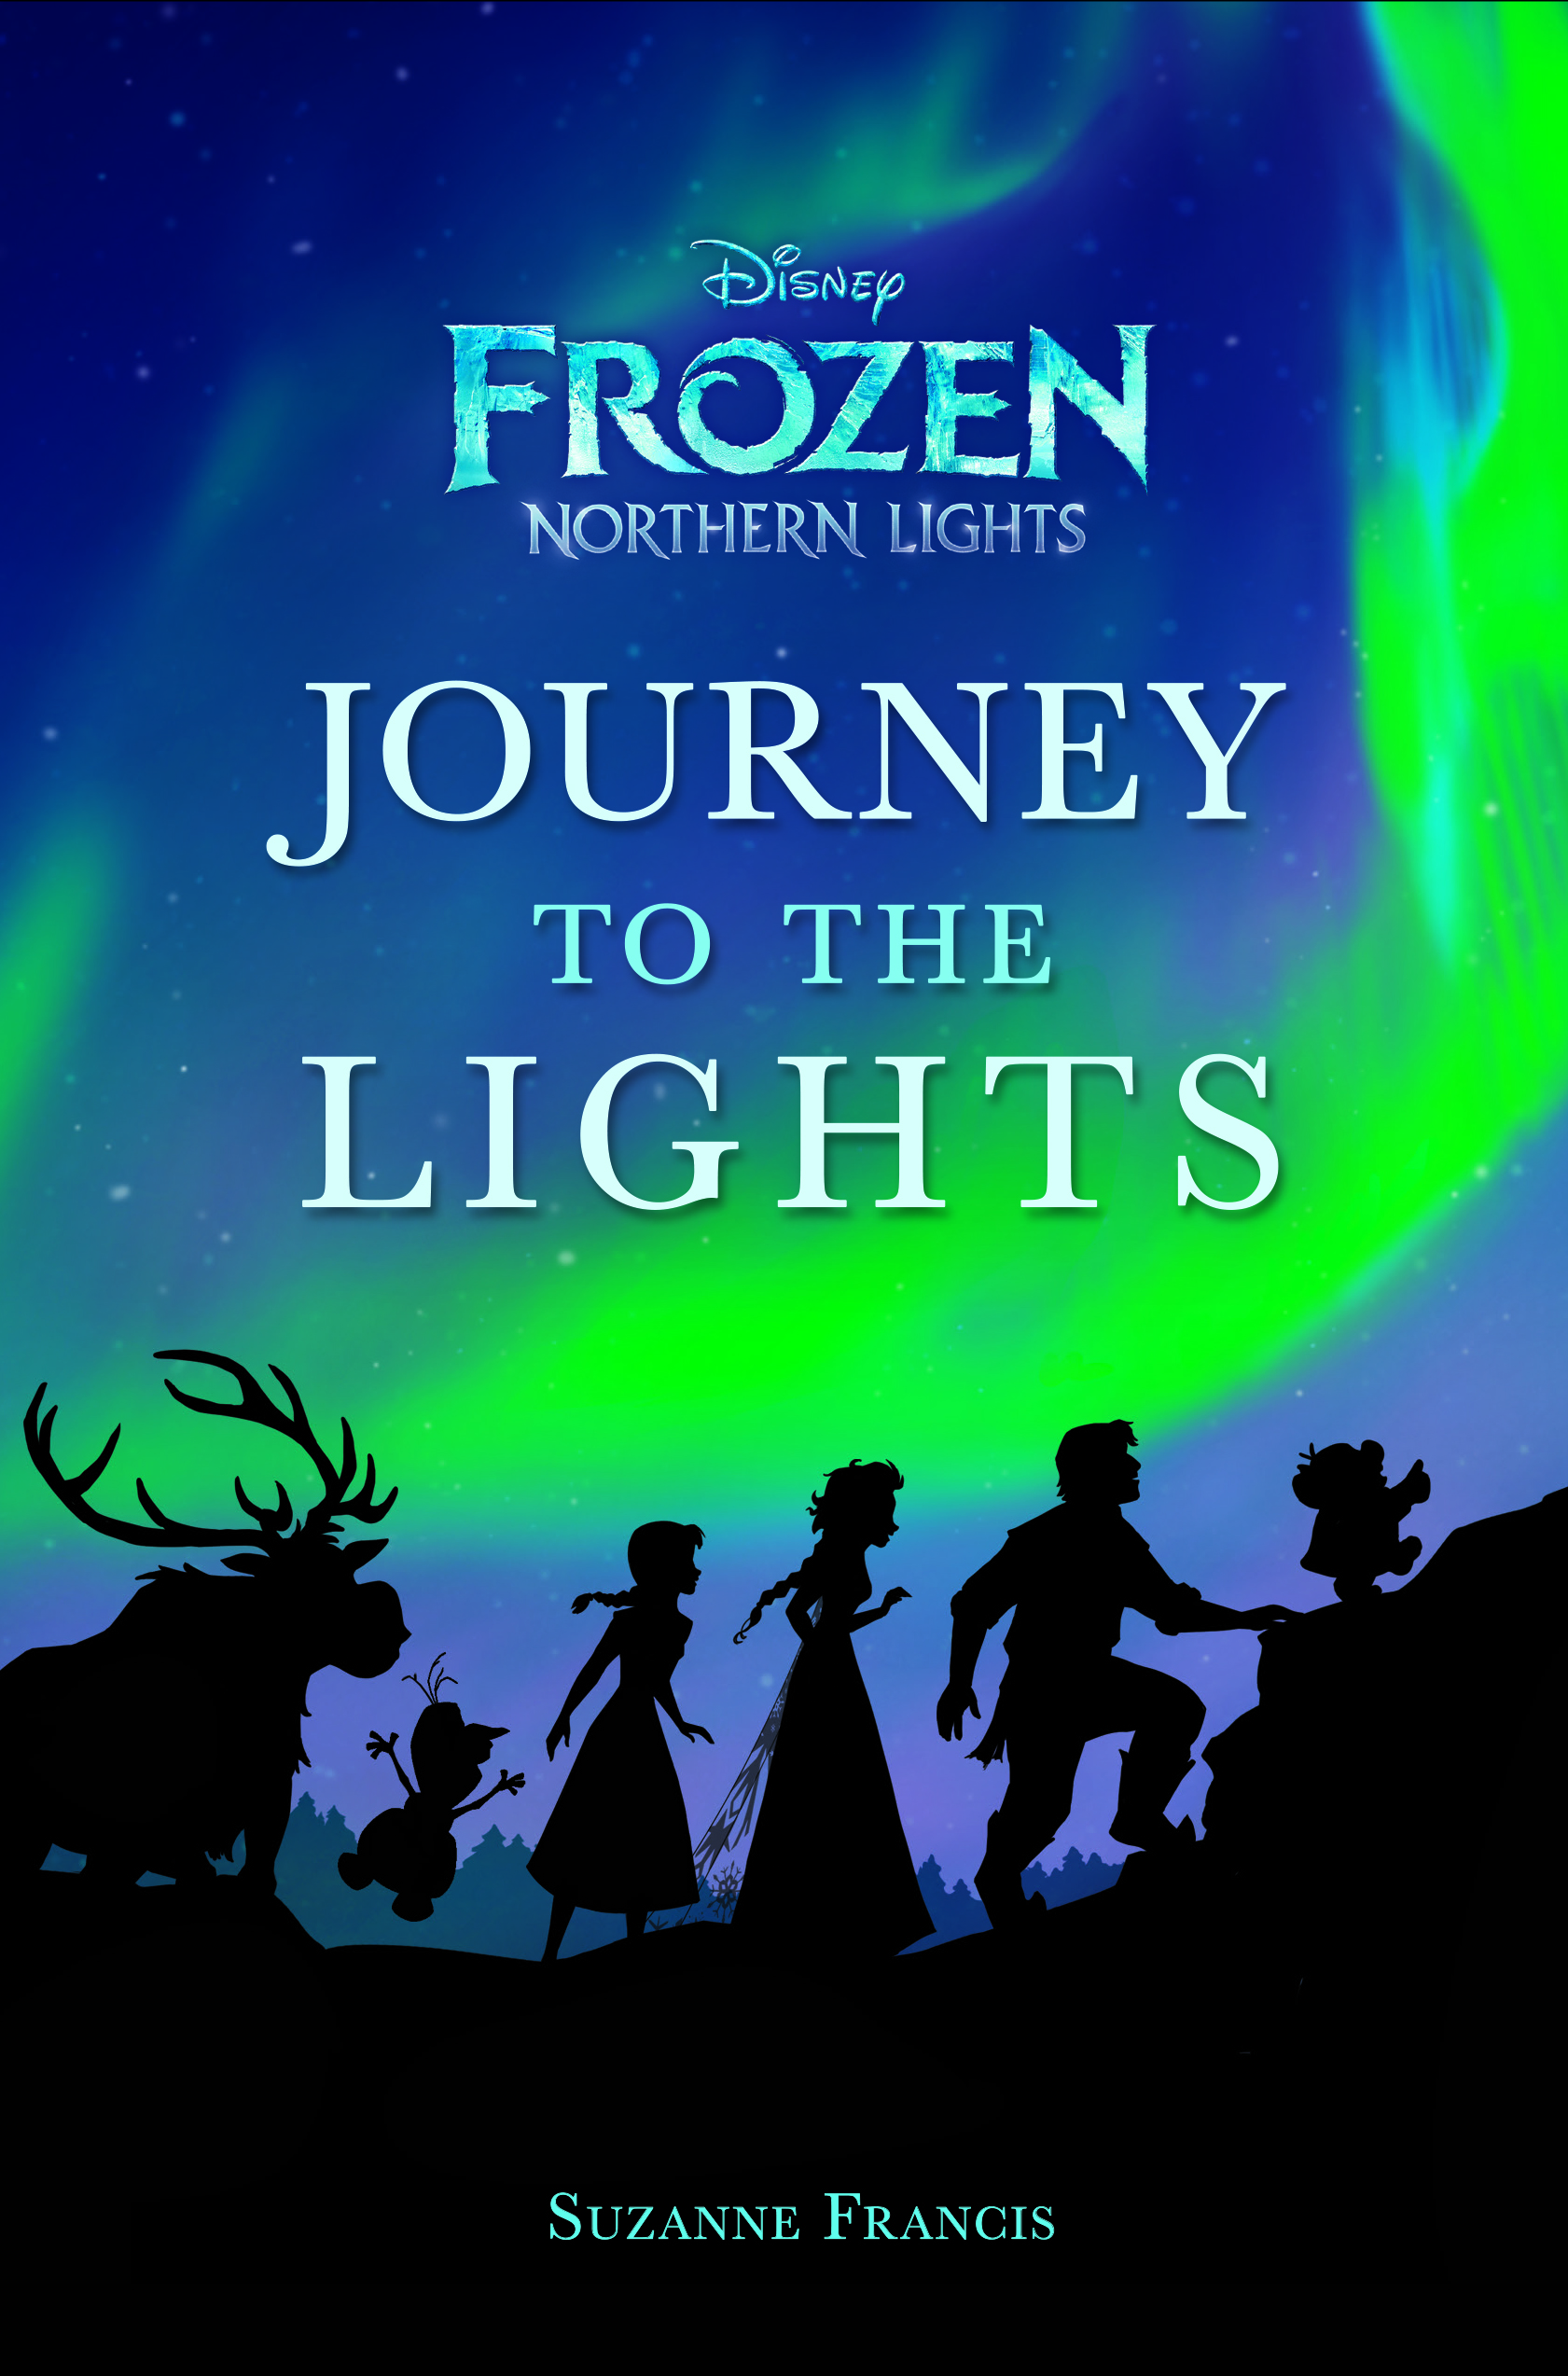 Frozen Coloring Book: Over 50 Coloring Pages Of Disney Frozen Movie, Elsa,  Anna, Hans, Olaf,.. To Inspire Creativity And Relaxation. A Perfect Gift  For Kids And Adults Before Upcoming Frozen 2 Movie